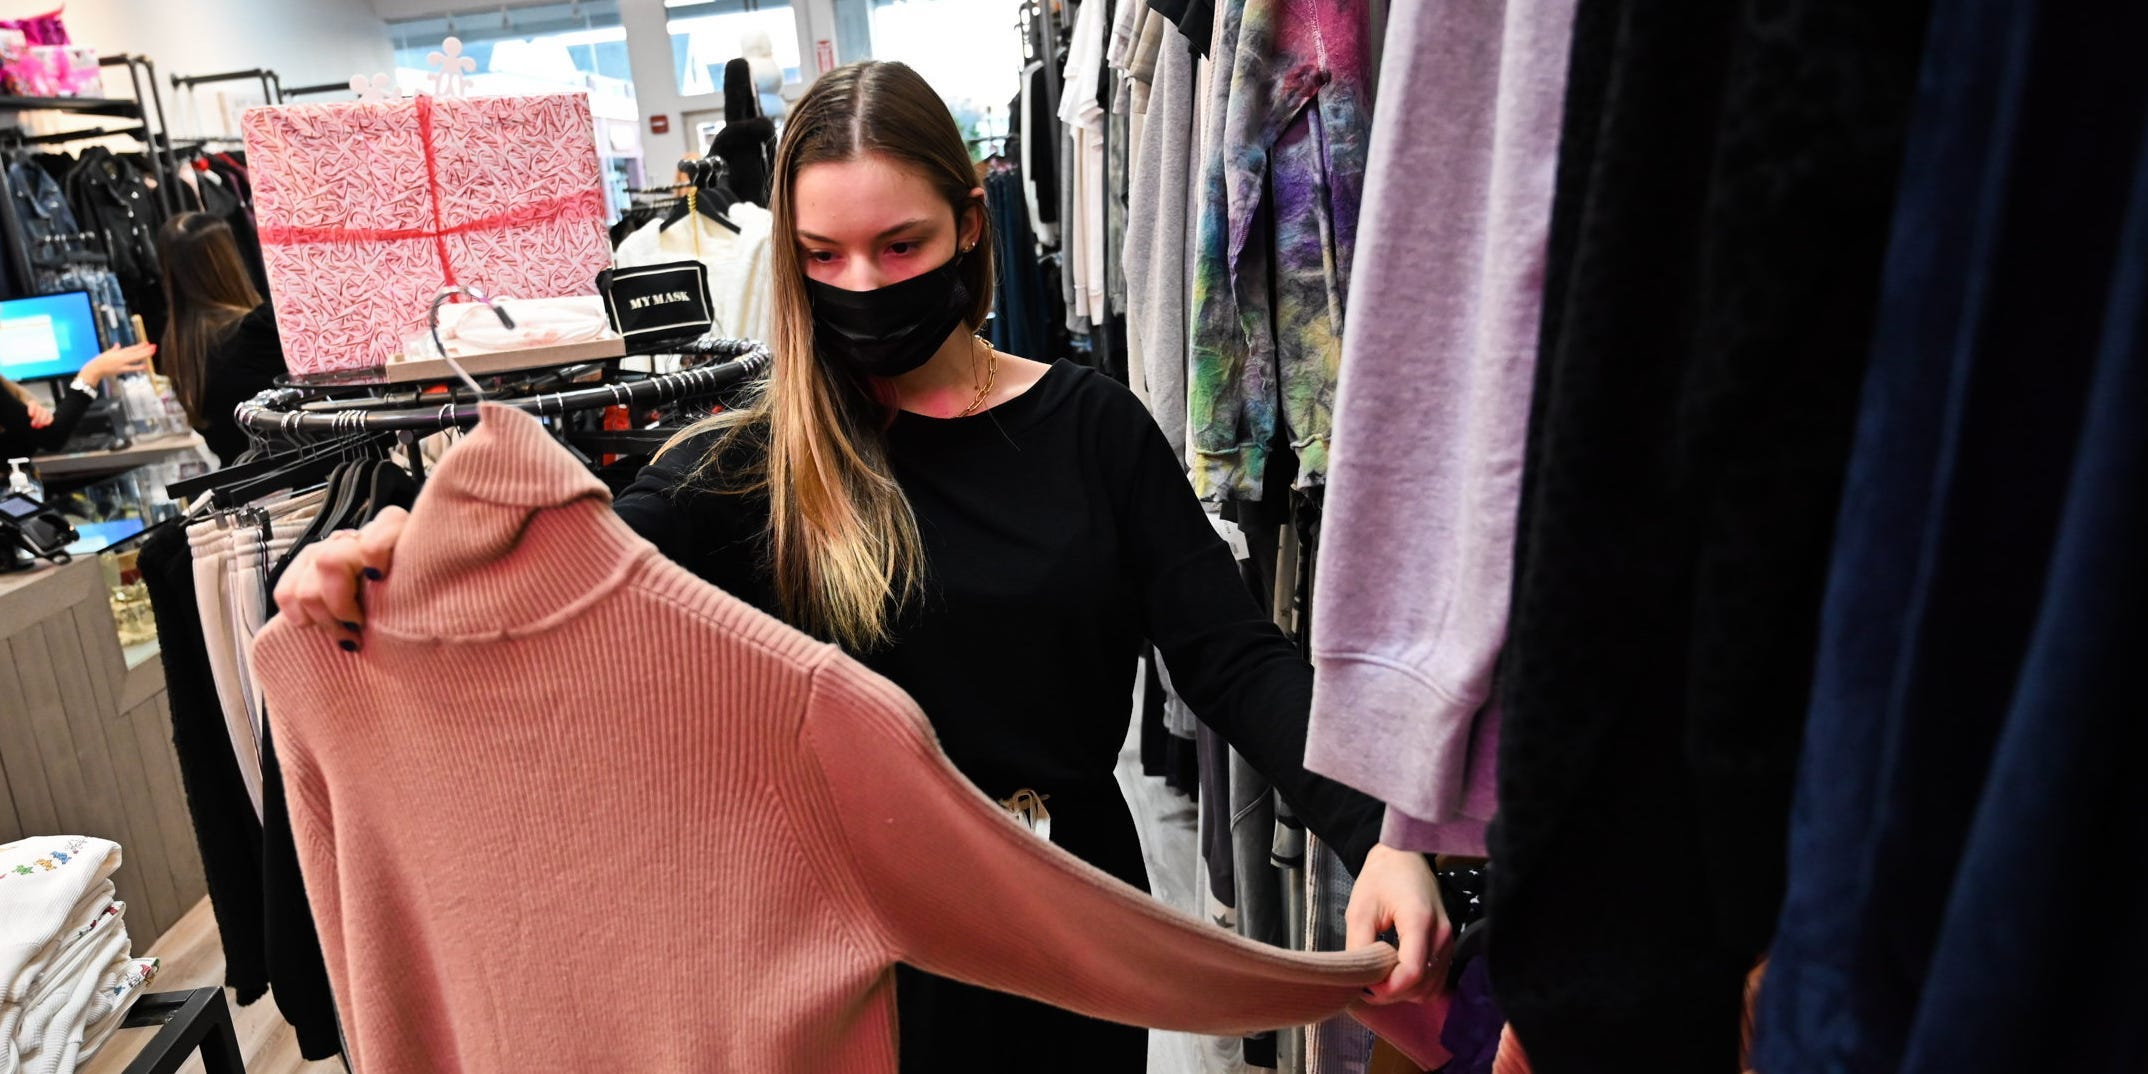 Woman wearing face mask holds up pink turtleneck sweater while clothes shopping